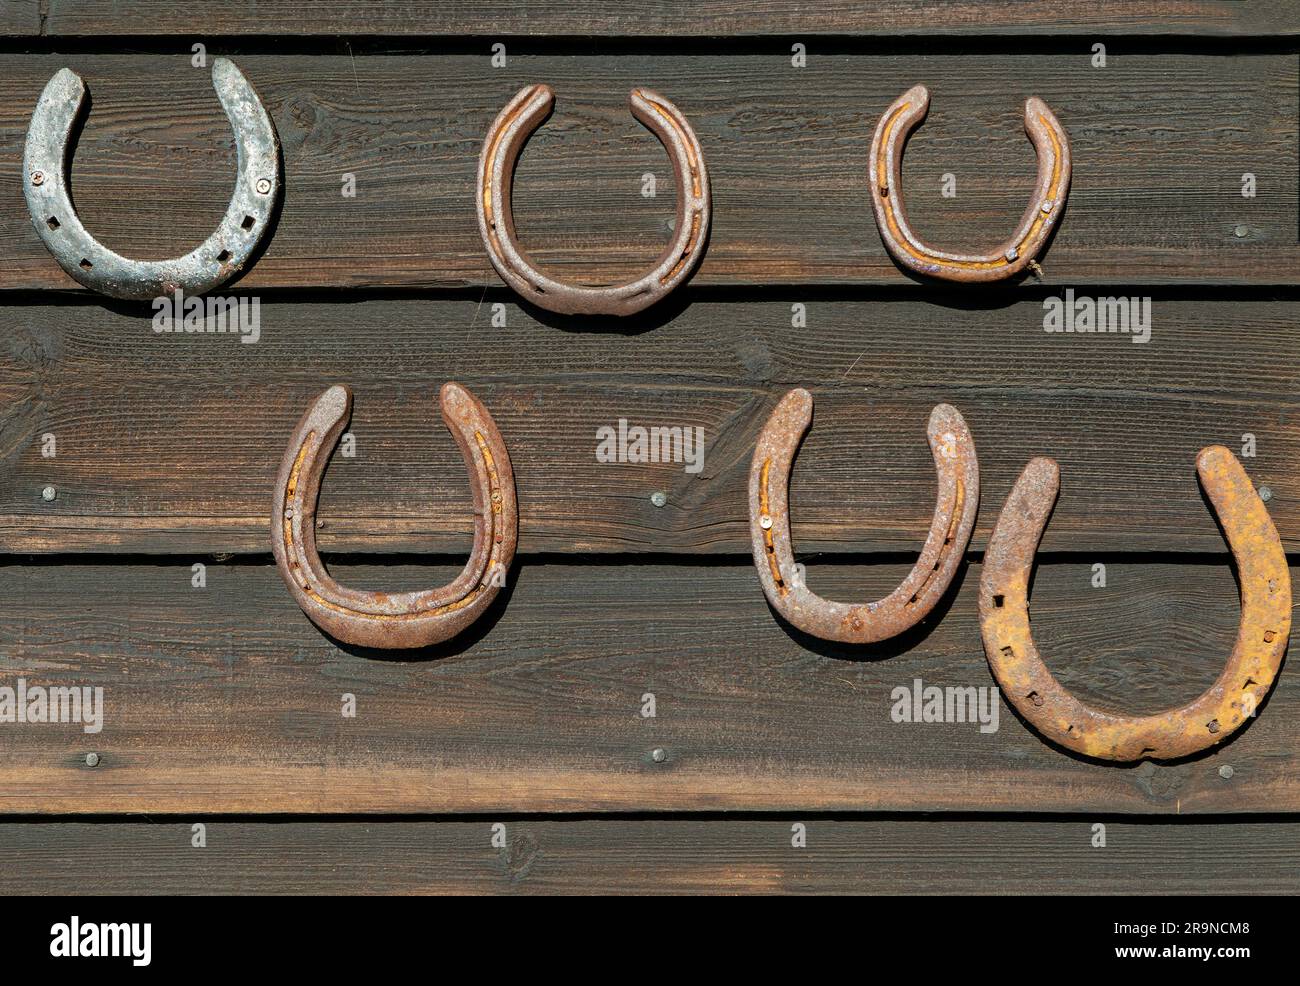 Competition Horseshoes